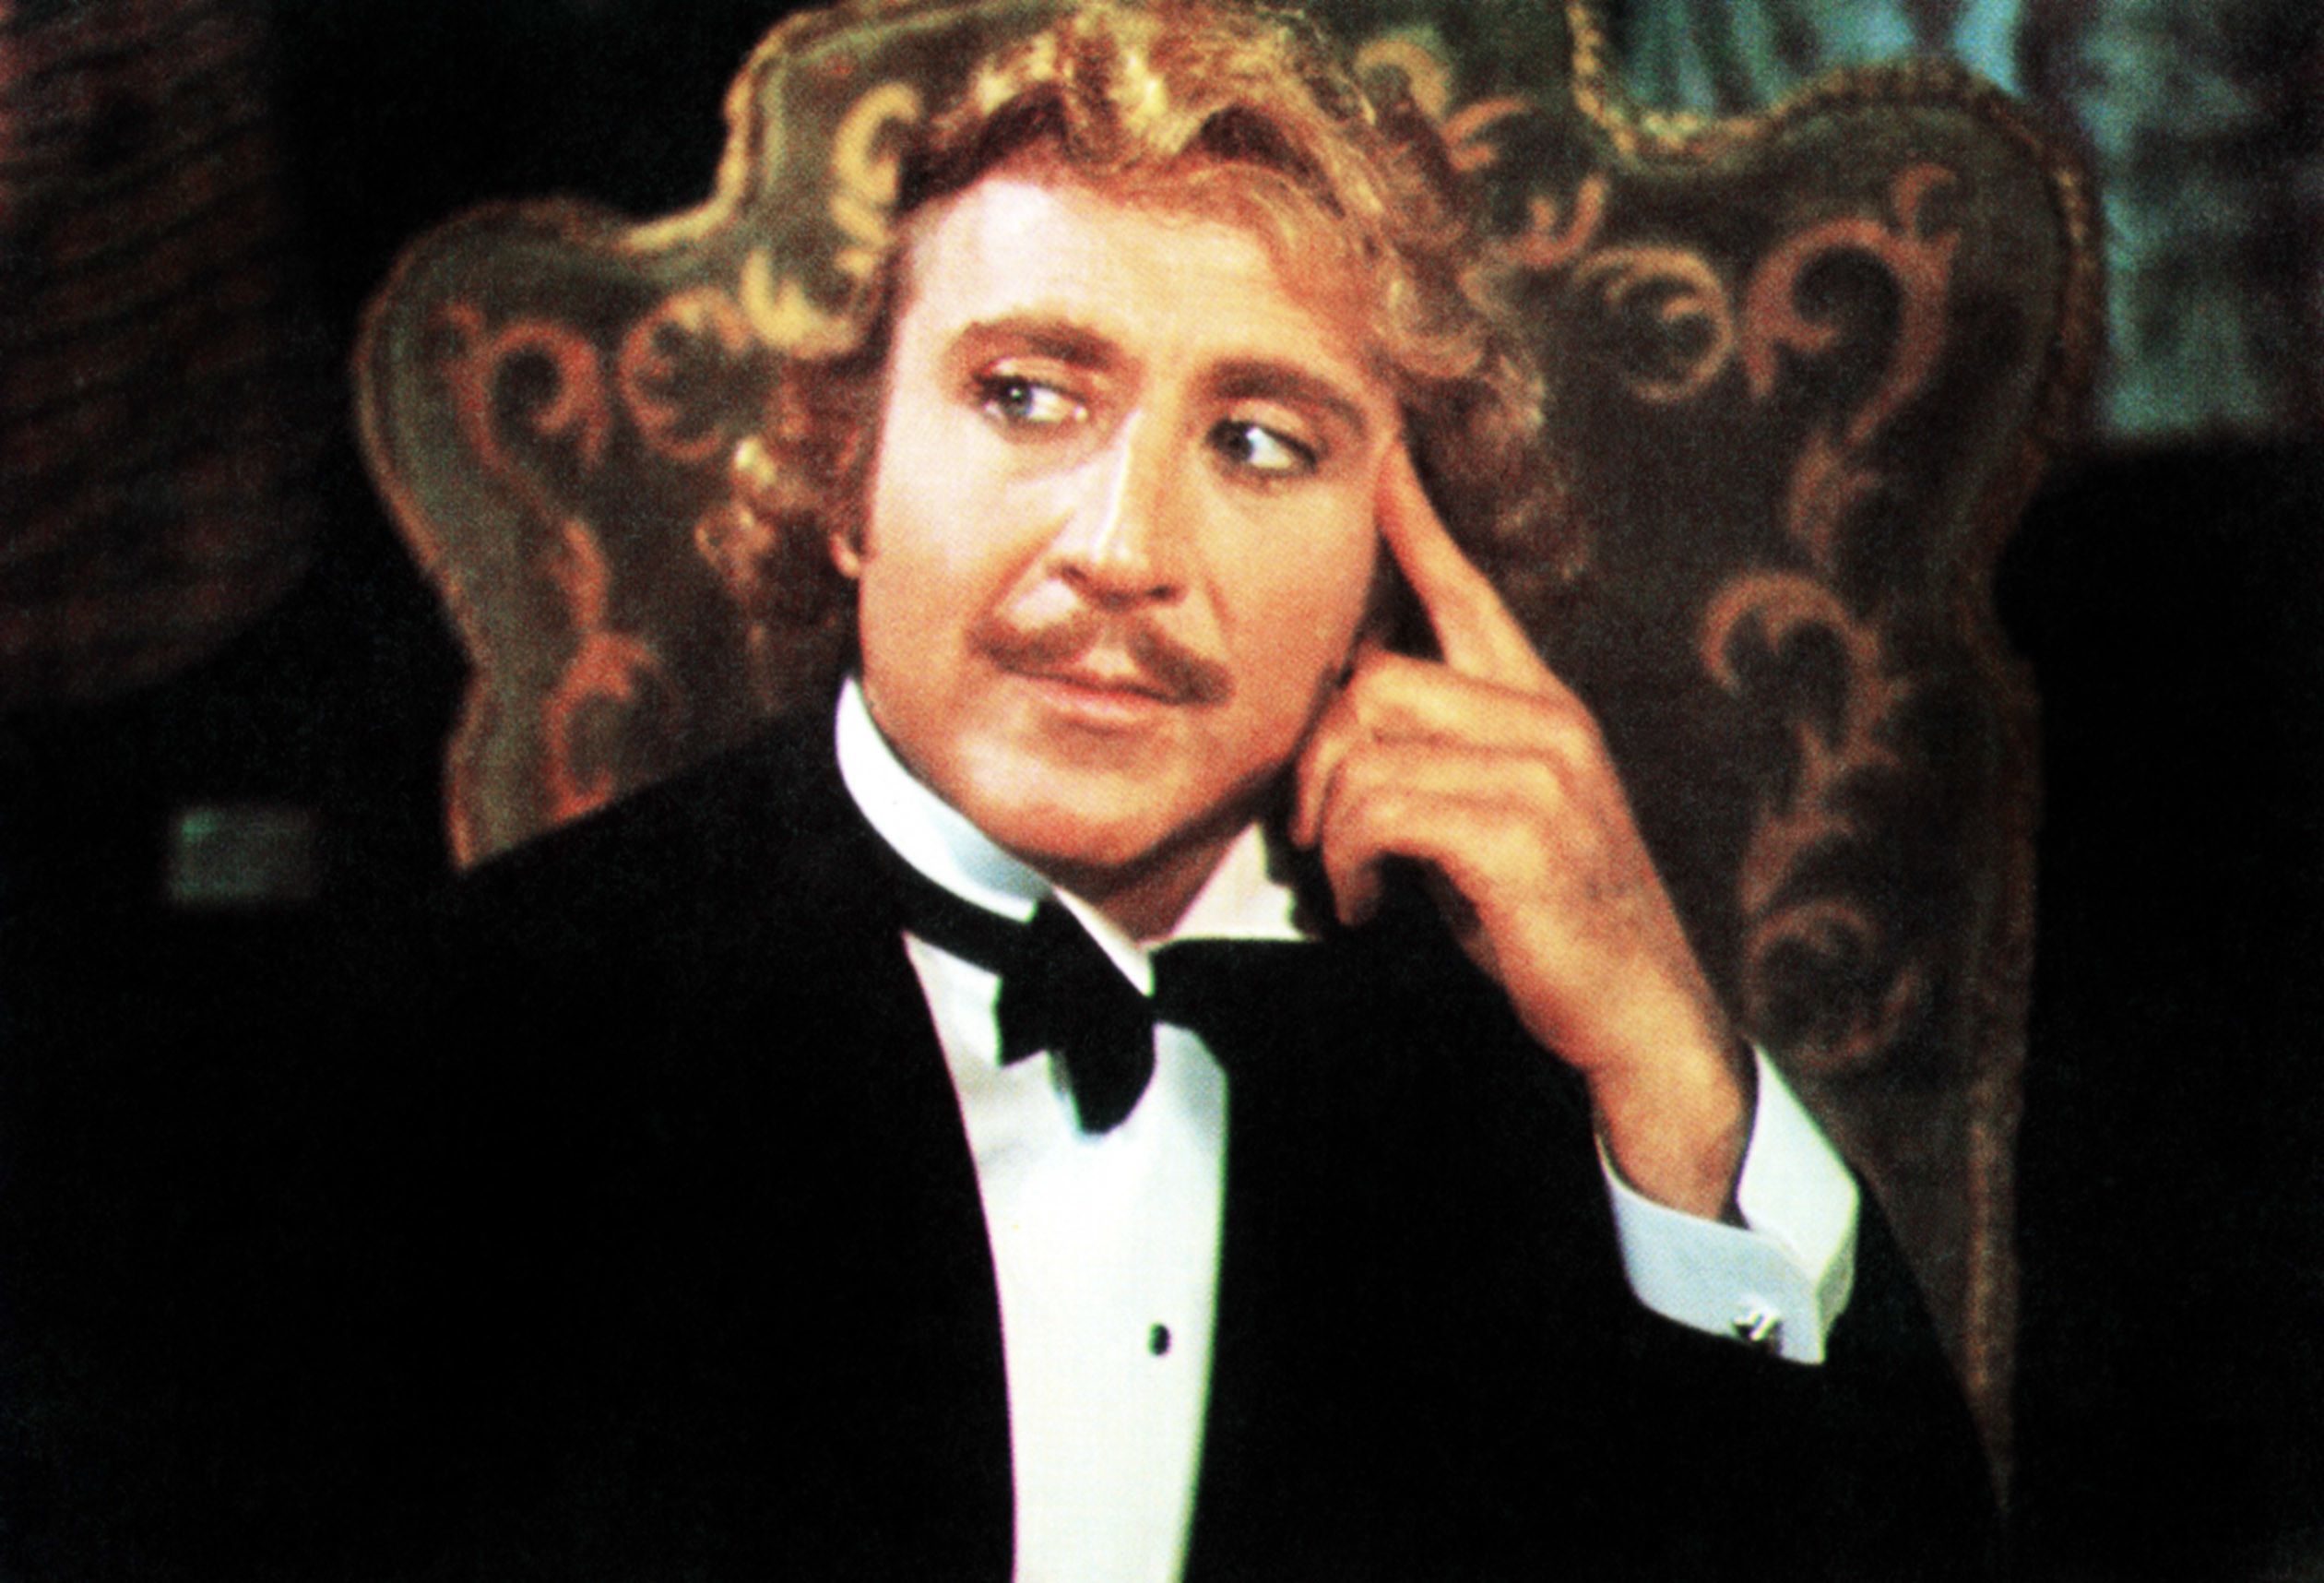 Gene Wilder as Young Frankenstein looking suave in a tuxedo